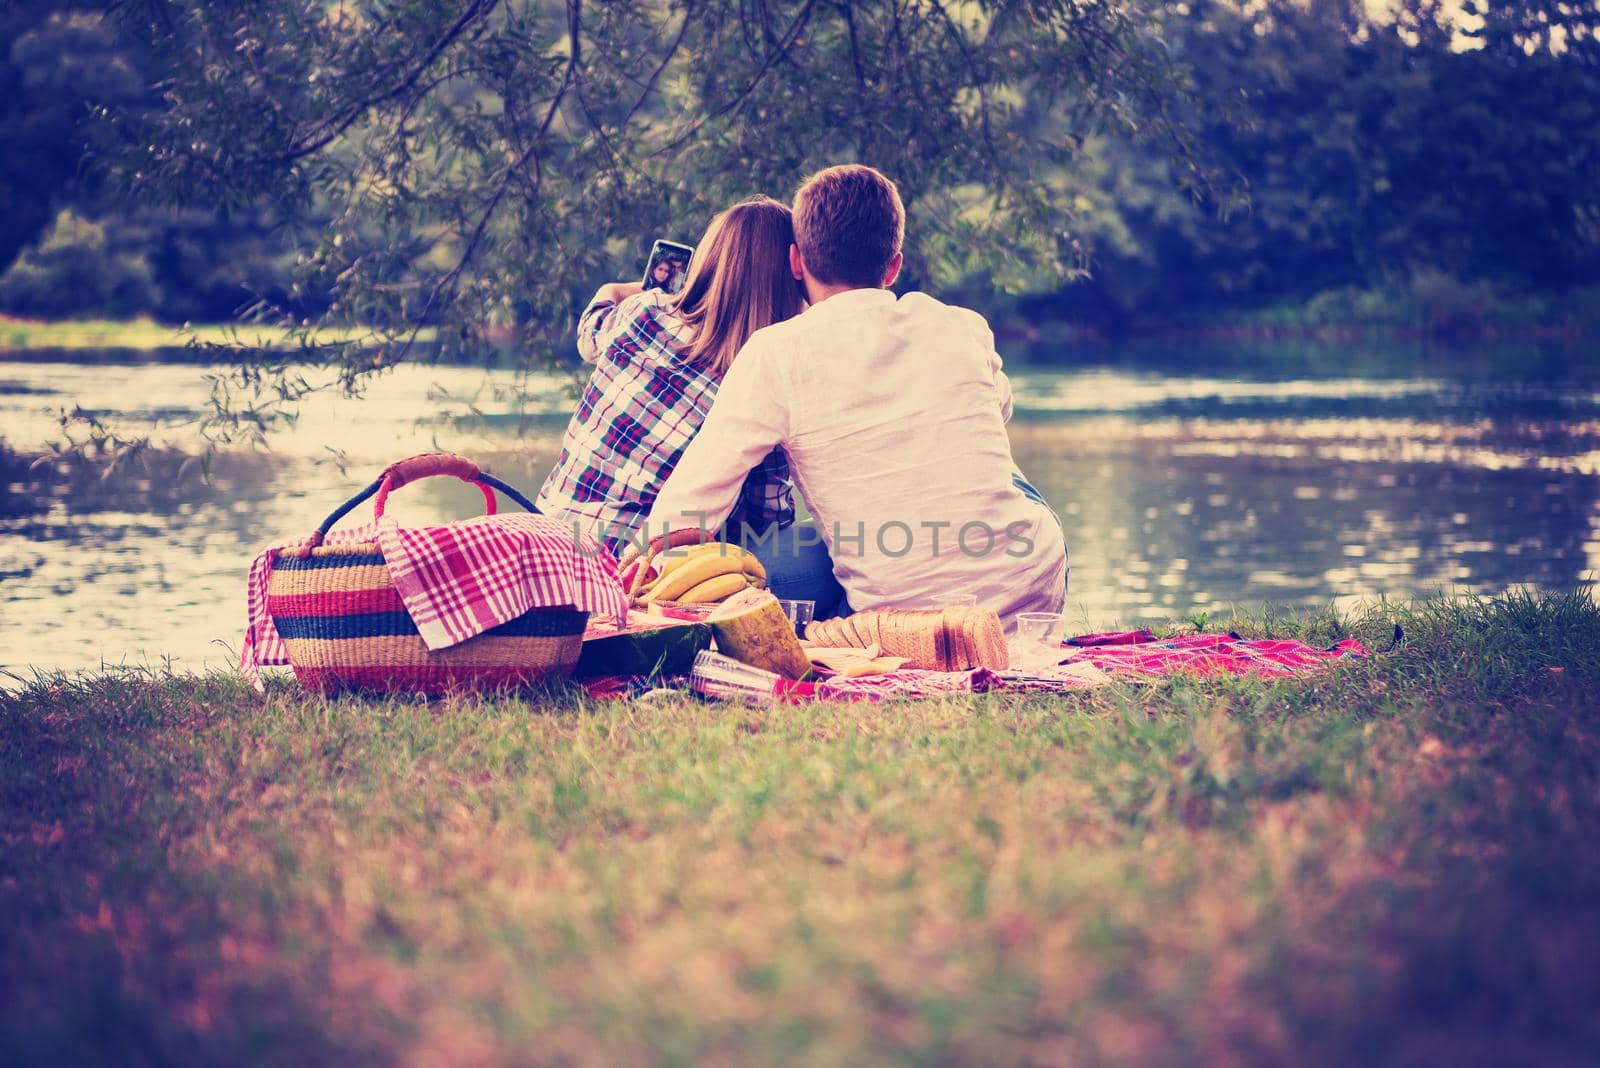 Couple in love taking a selfie by mobile phone while enjoying picnic time drink and food in beautiful nature on the river bank